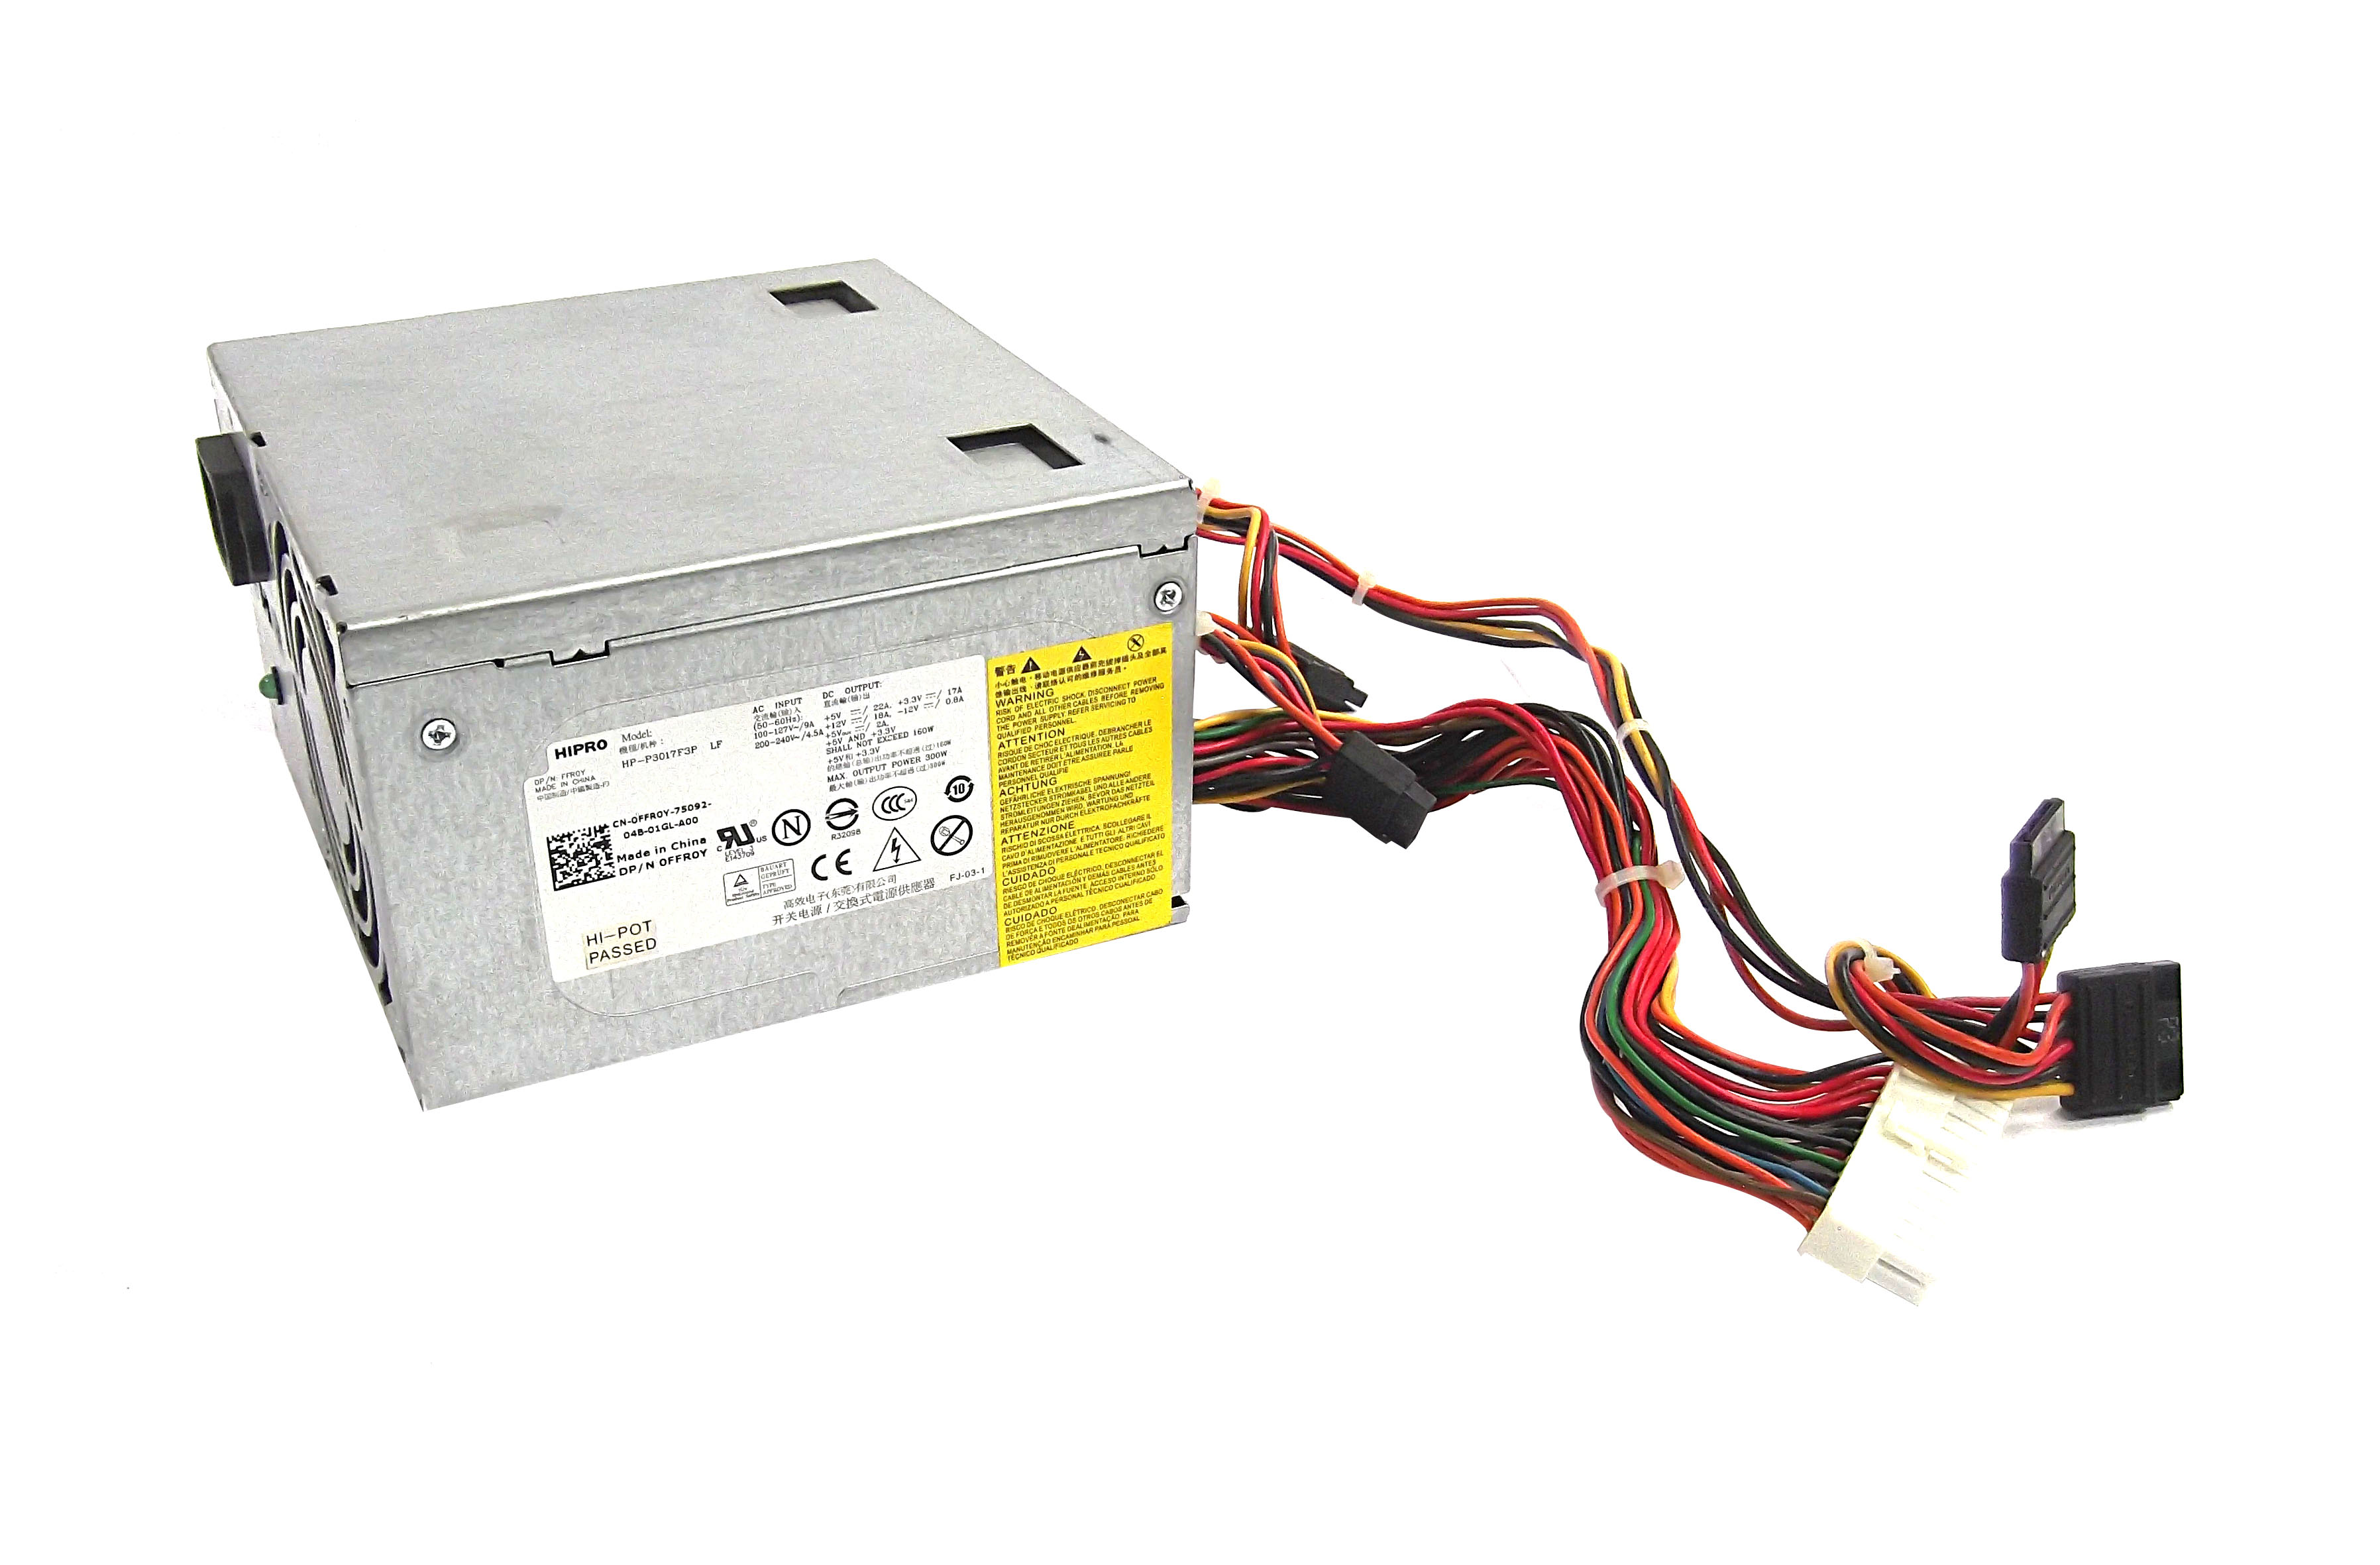 Dell 0FFR0Y 300-Watts 24-Pin ATX Power Supply for Inspiron 518/519